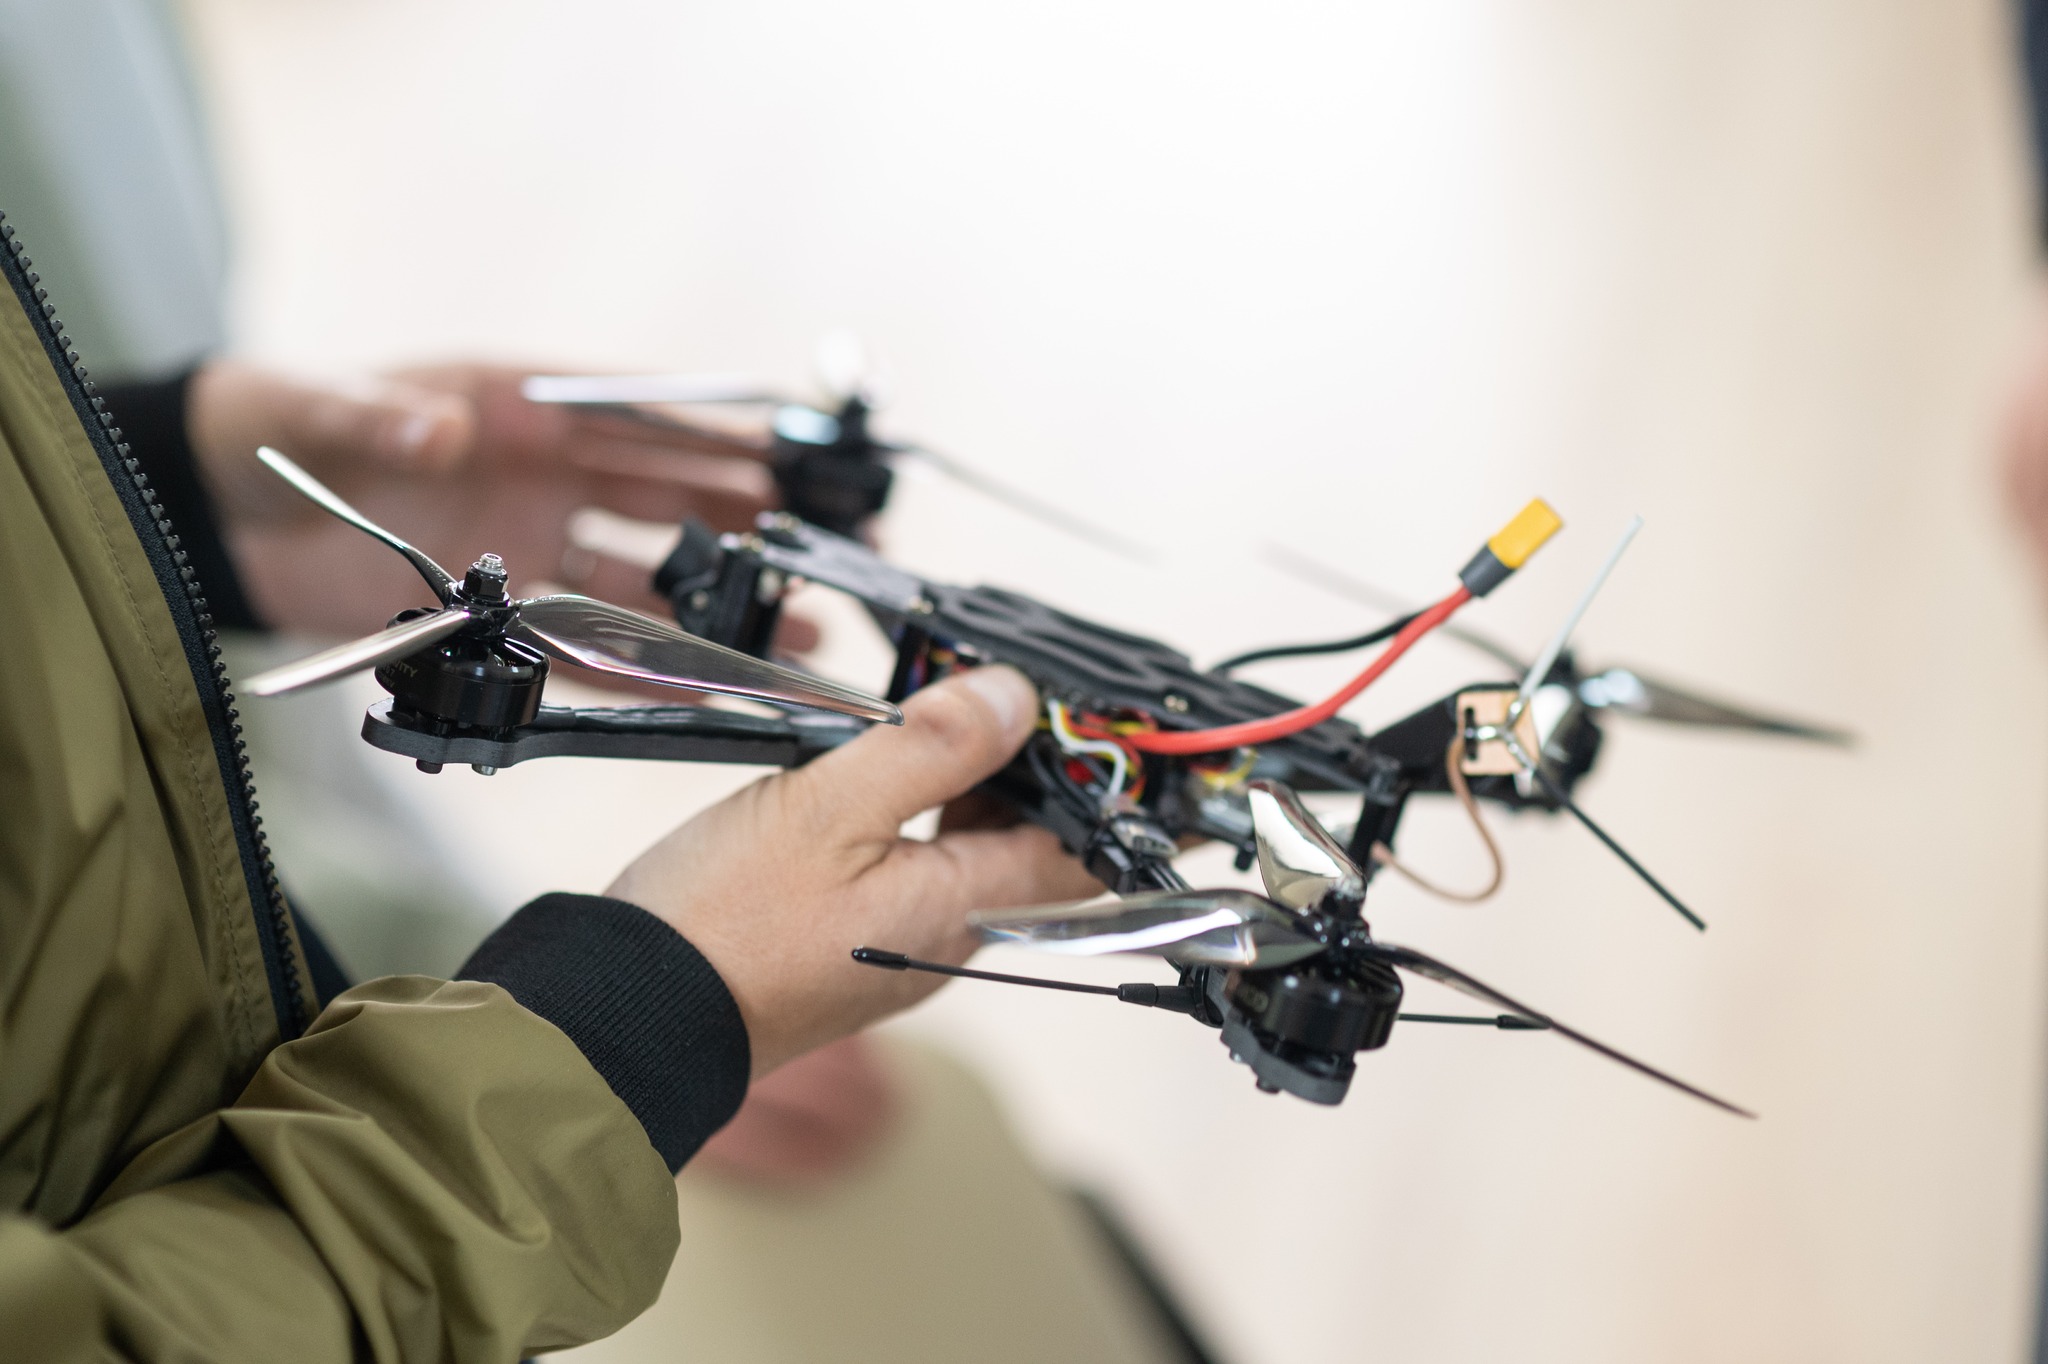 In Ukraine, a project enables individuals to build FPV drones at home for the Armed Forces